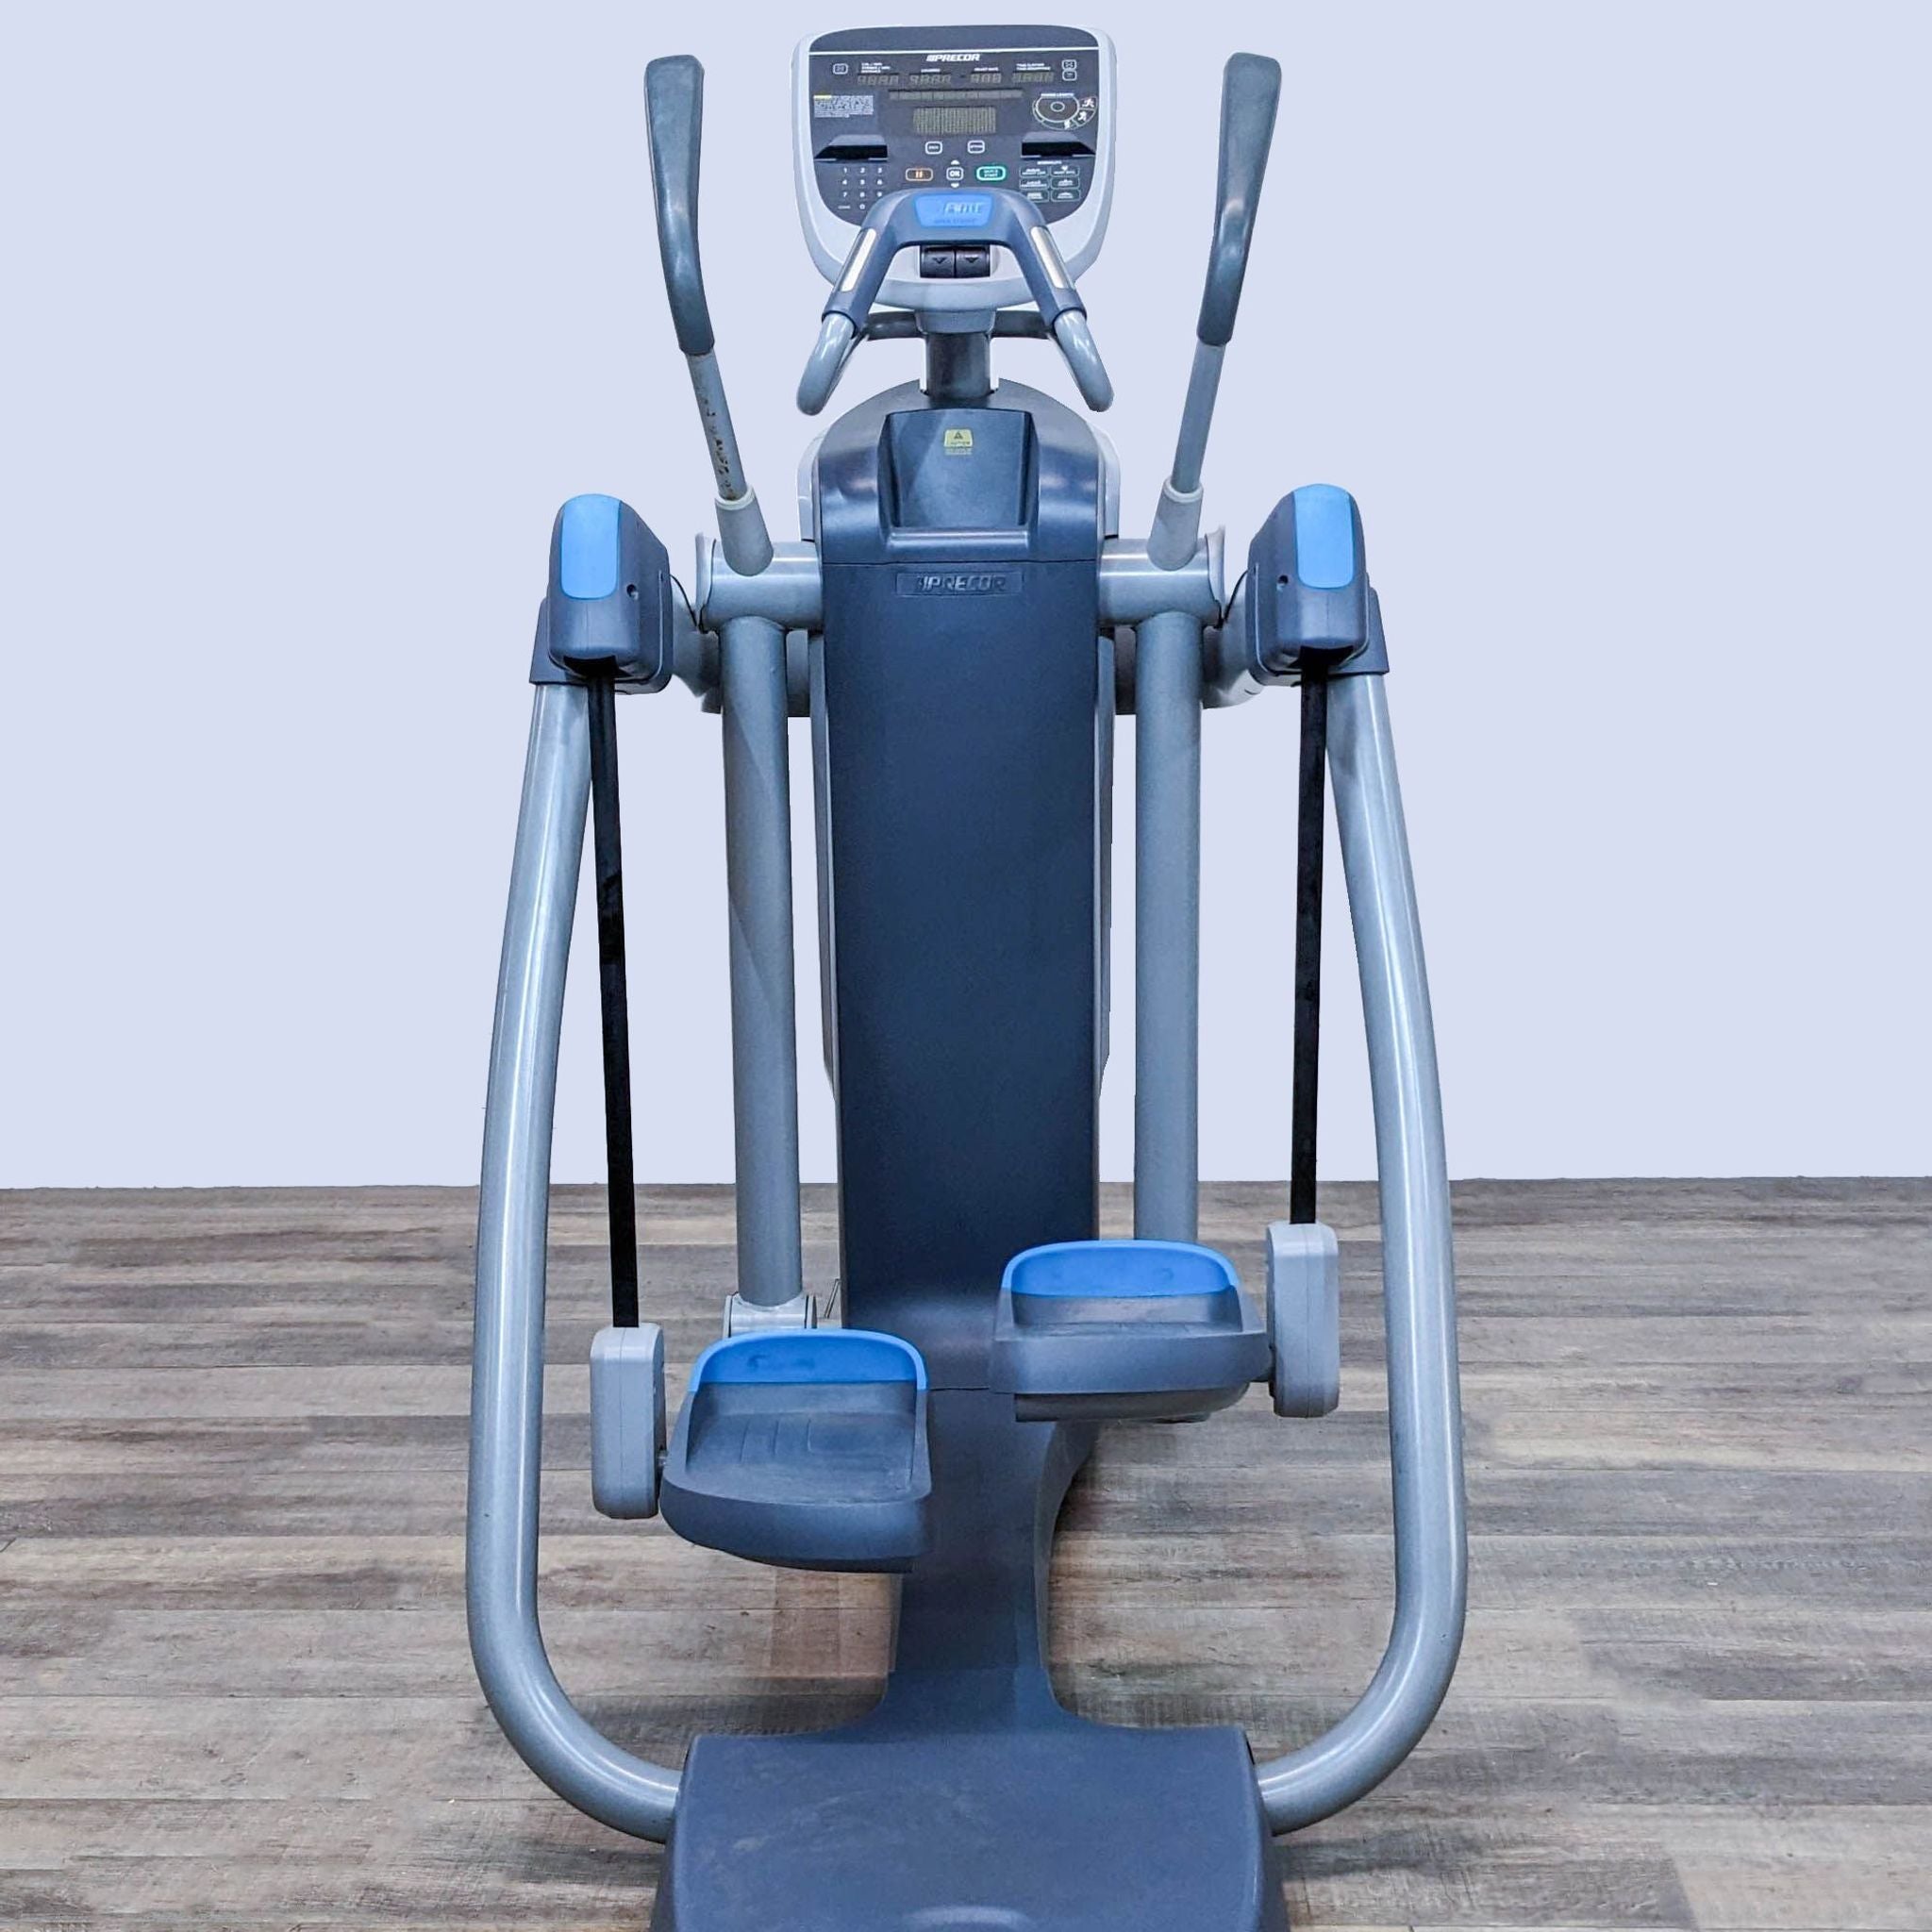 Precor elliptical machine with blue and gray colors, digital display, in a gym setting.